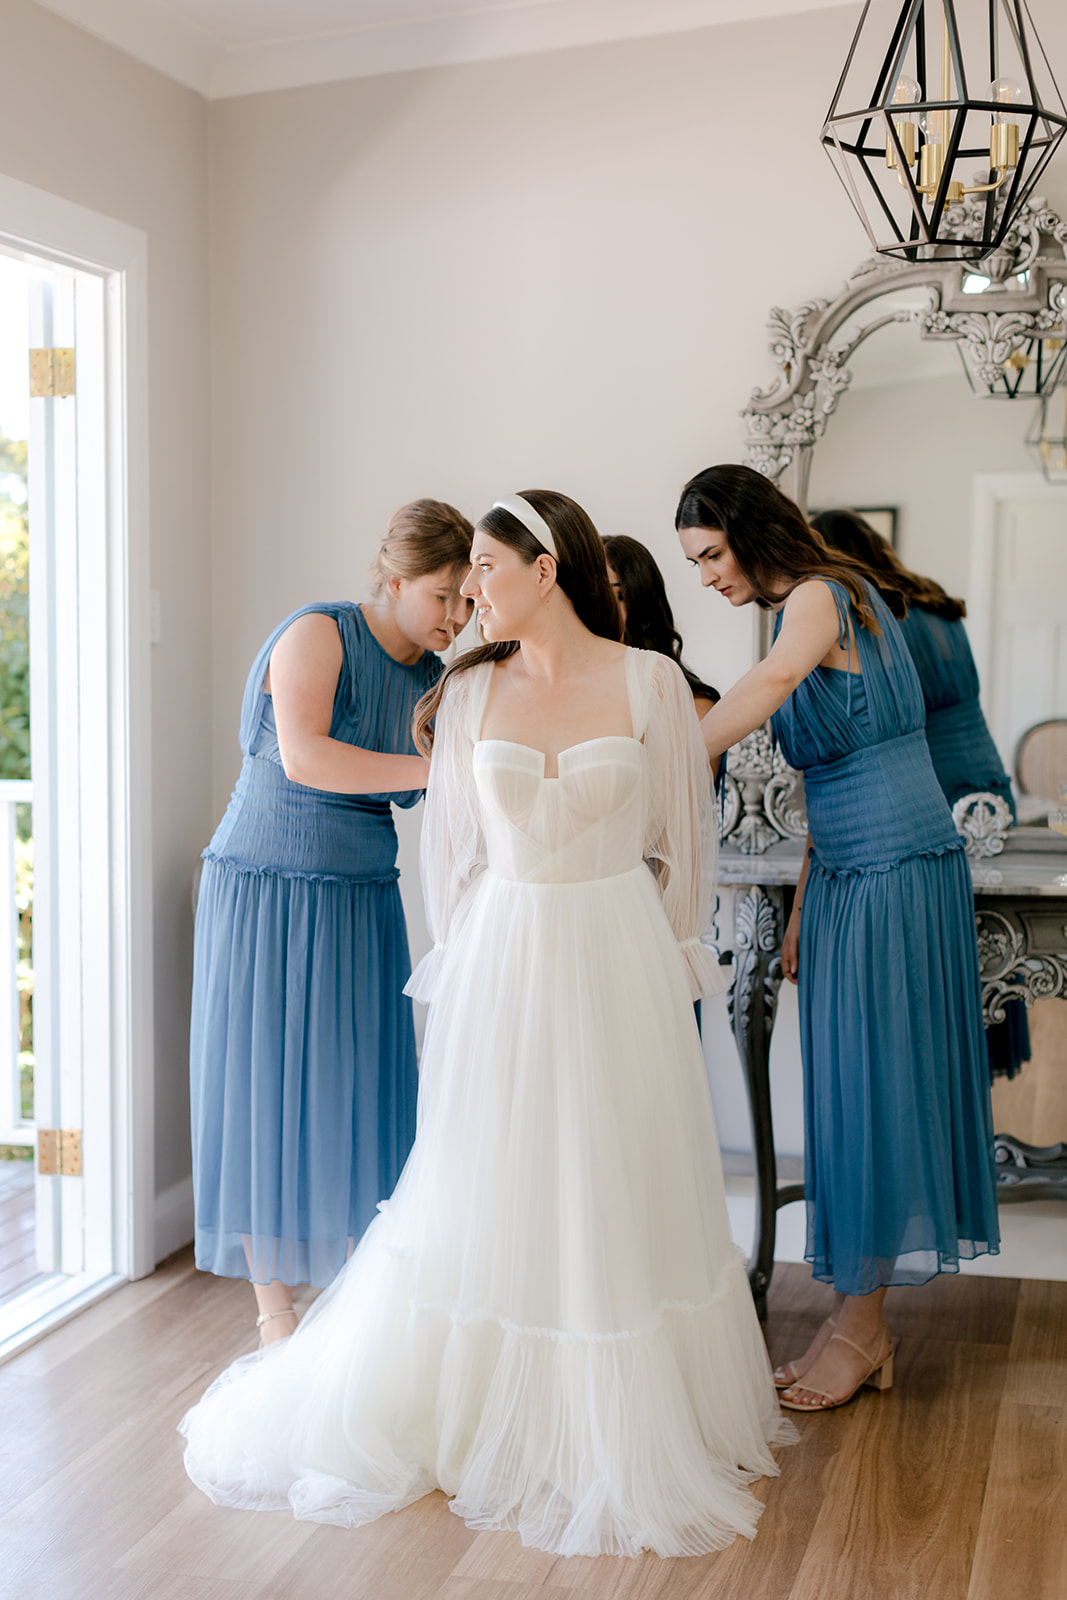 Bridesmaids helping bride get ready for her elegant country wedding.